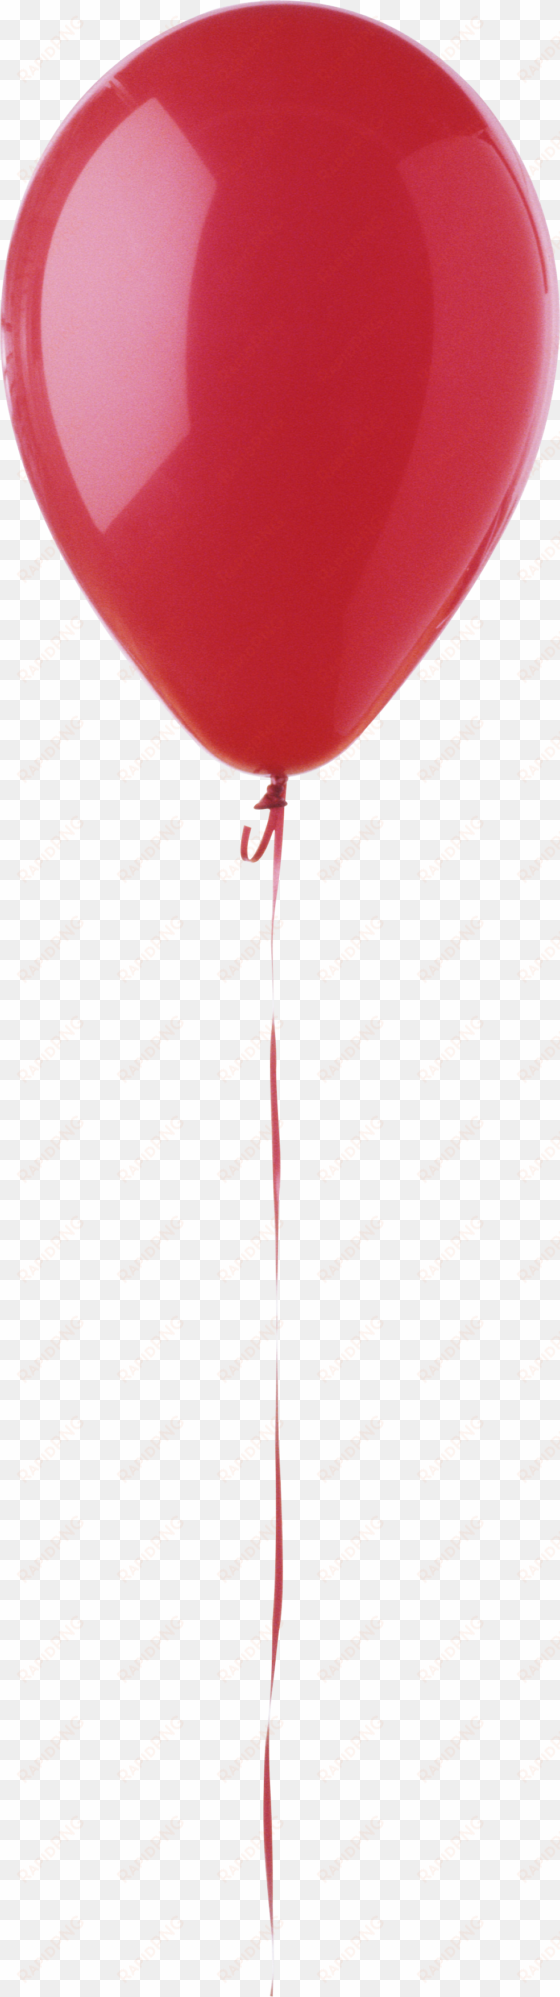 picture free balloon background png images free picture - one balloon transparent background